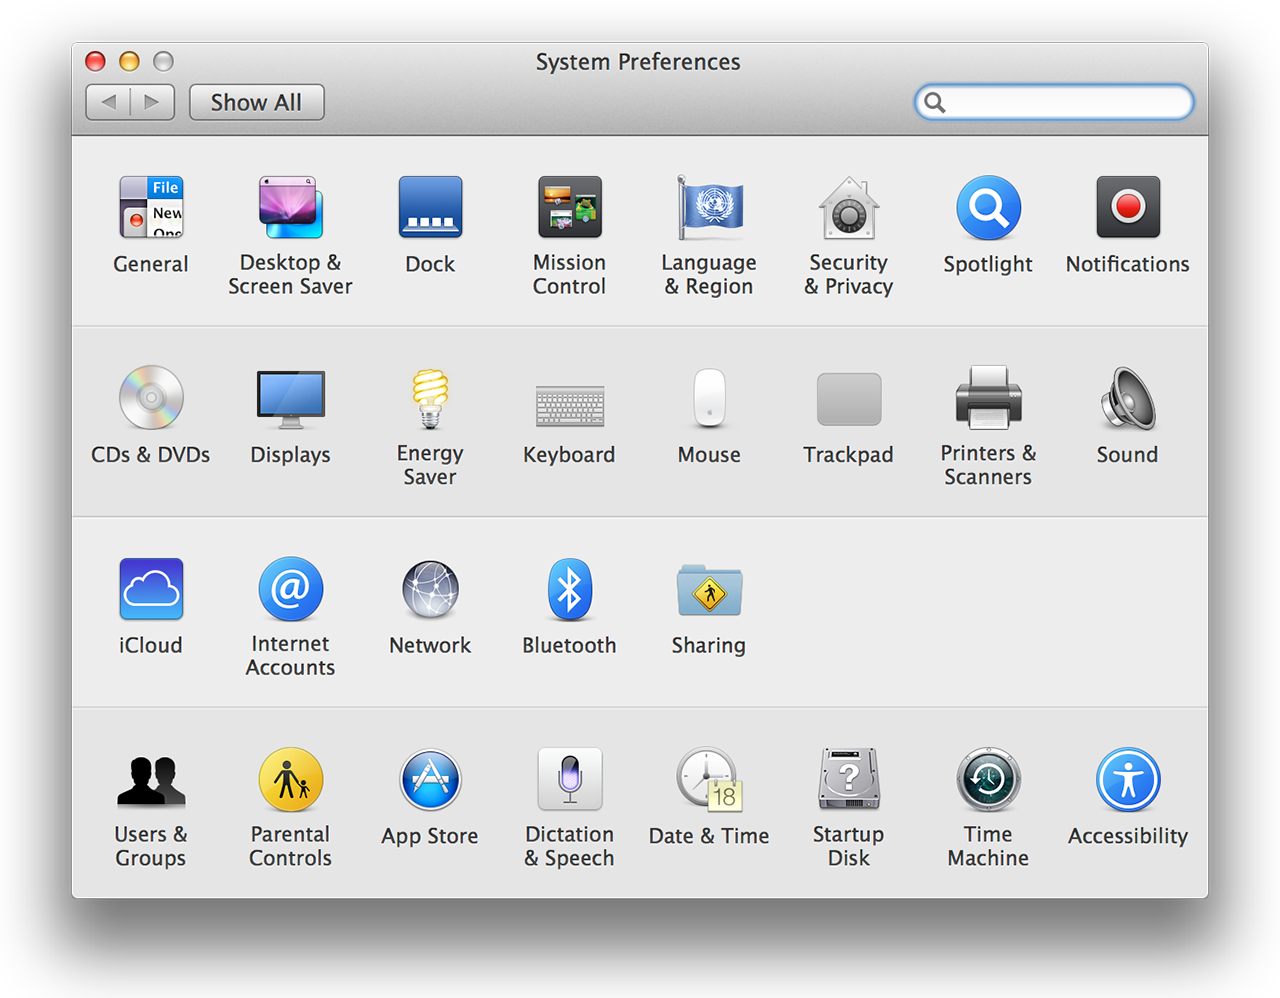 System Preferences: now with (slightly) larger icons.